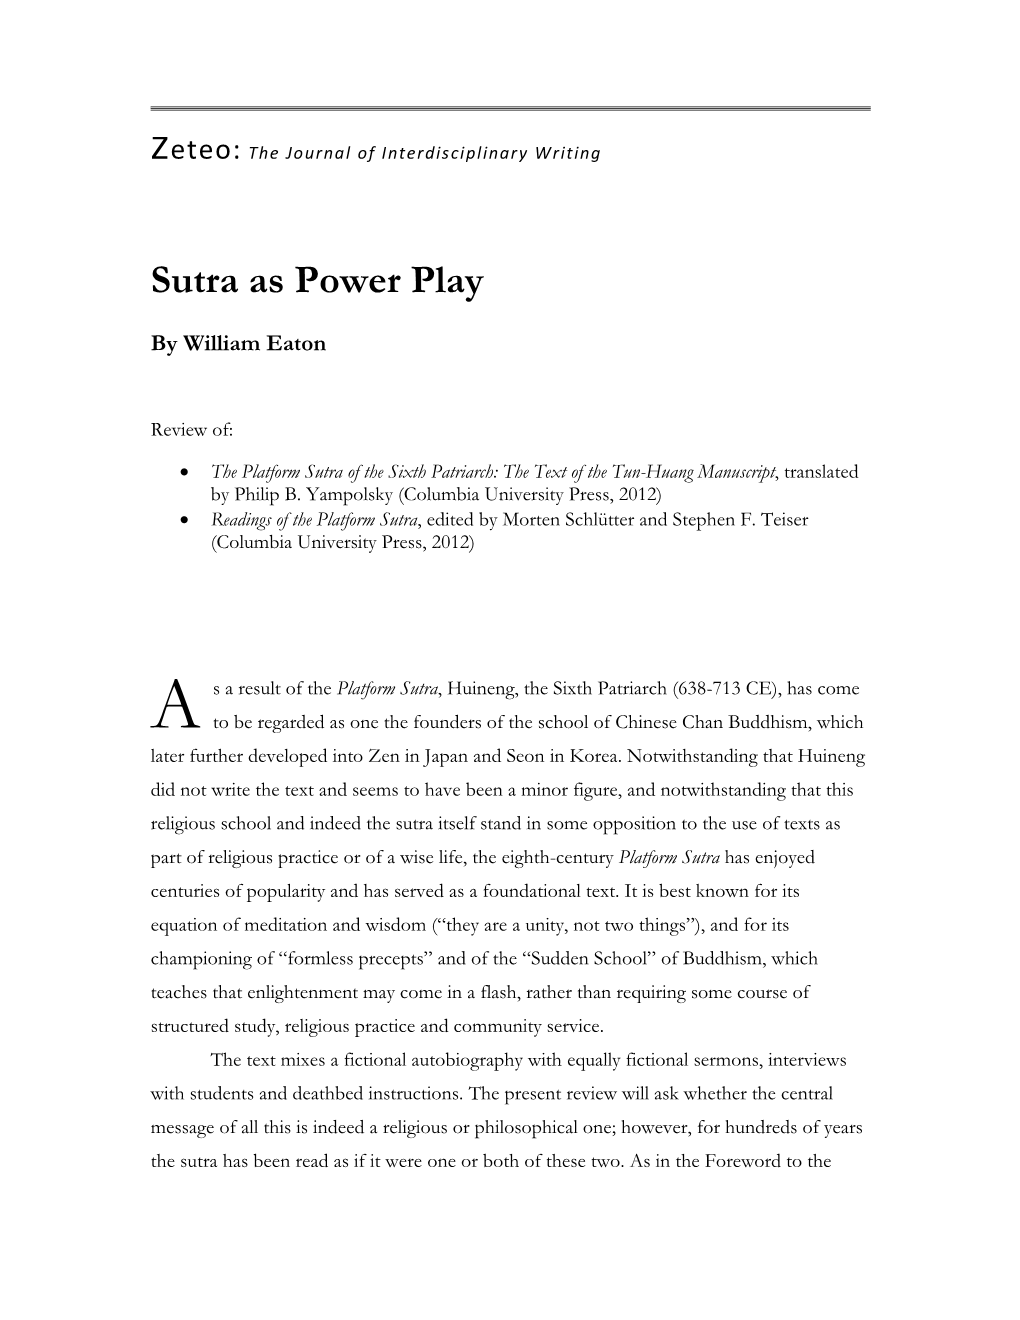 Sutra As Power Play